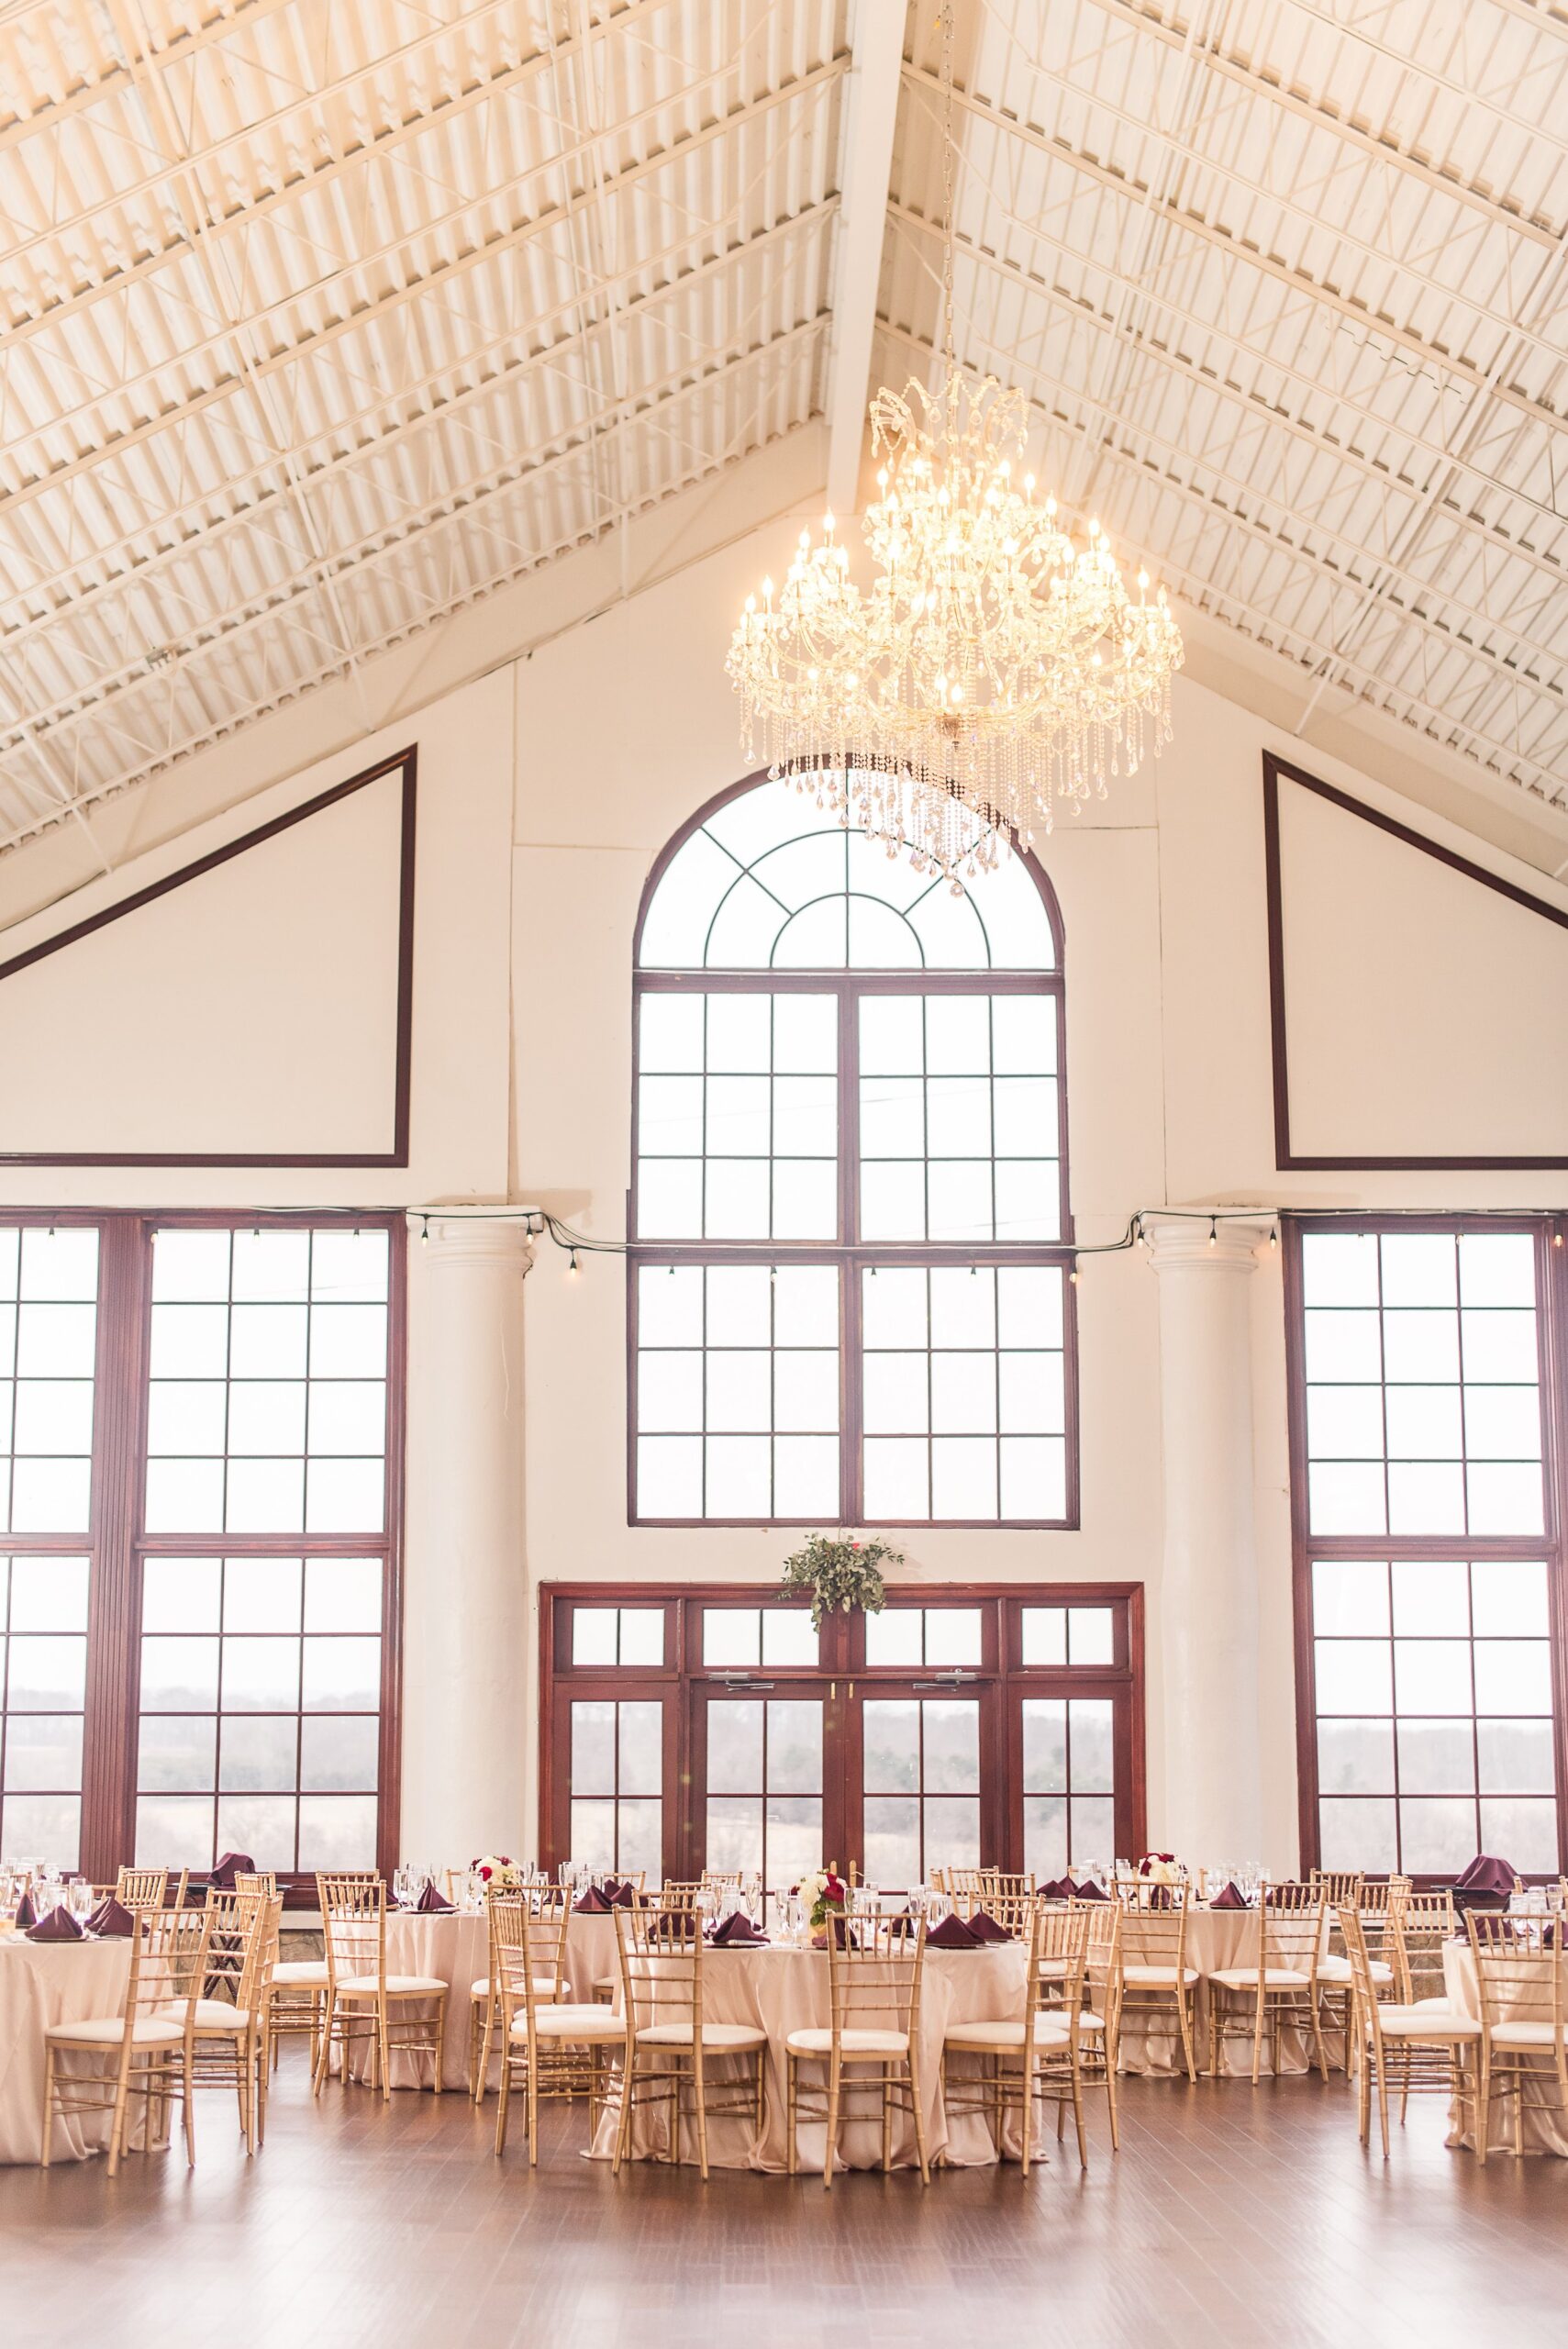 The ballroom reception space at one of the best wedding venues in Loudoun County Virginia